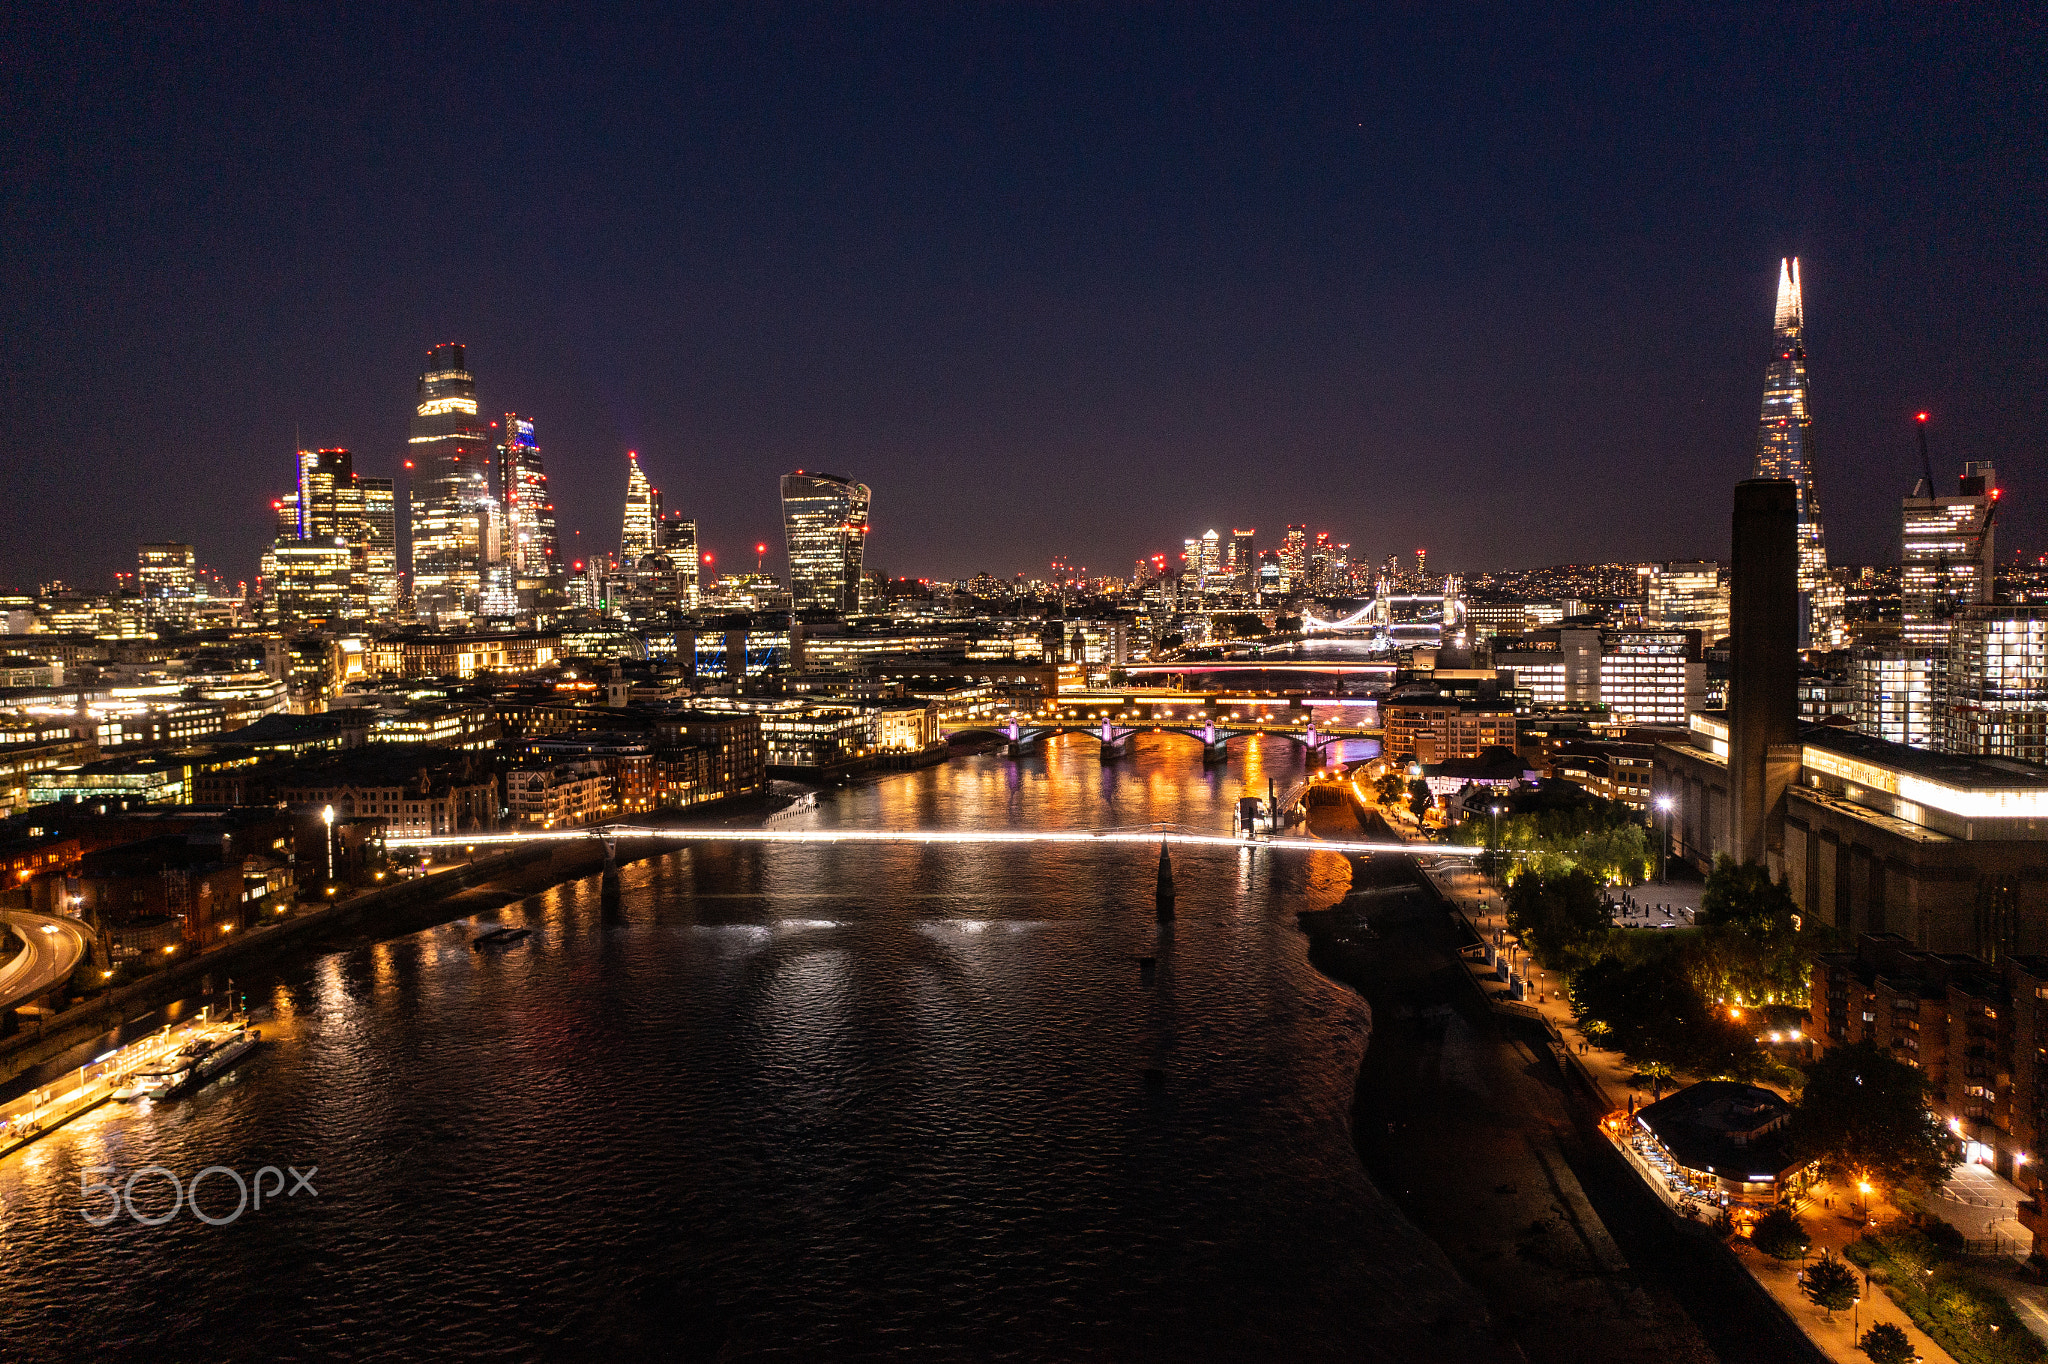 Night view of the beautiful London city with urban architectures and